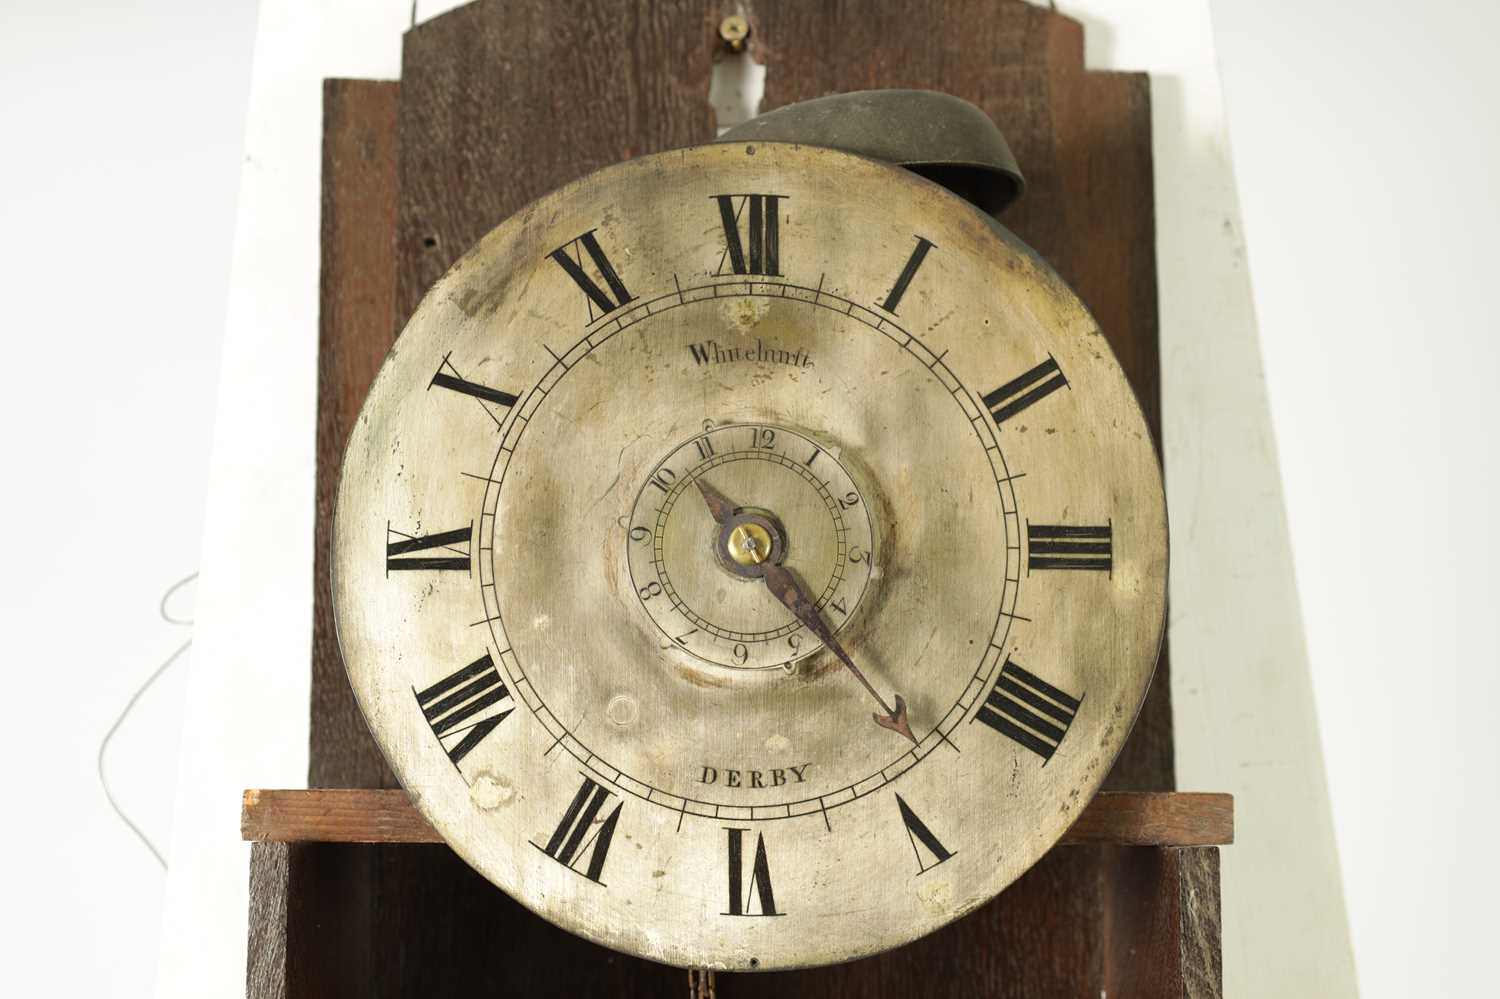 WHITEHURST, DERBY. A LATE GEORGE III HOODED WALL CLOCK - Image 6 of 10